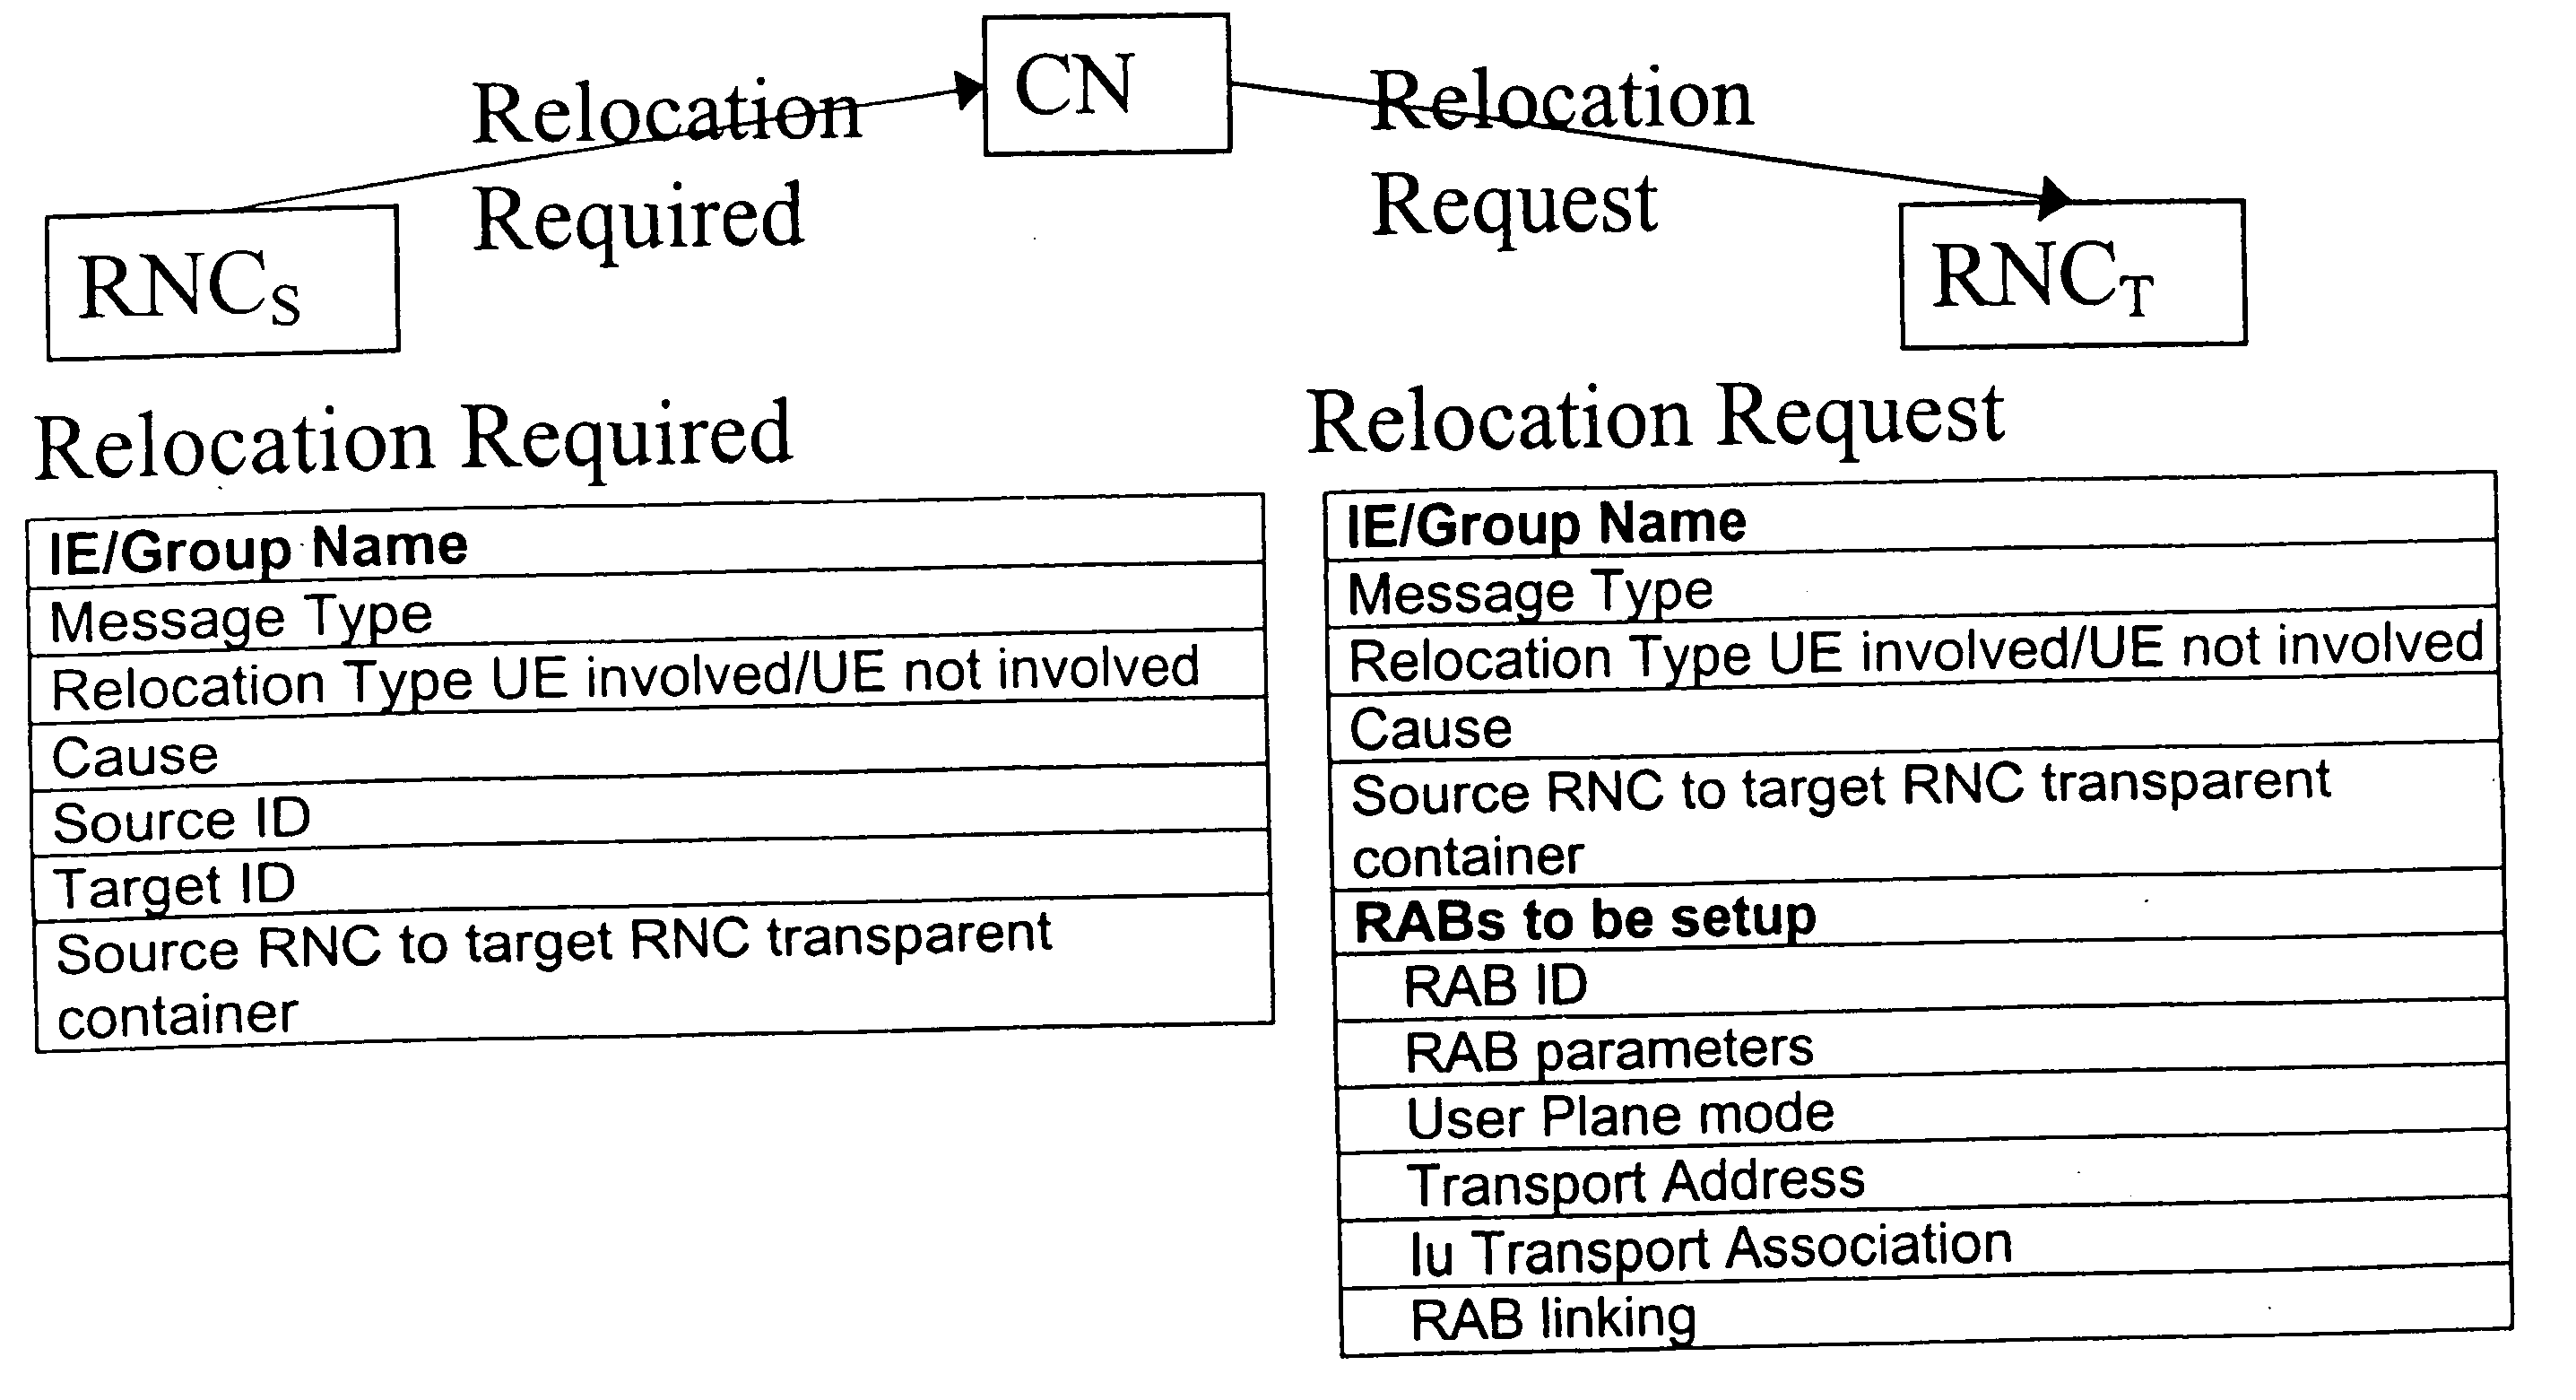 SRNS relocation in a UMTS network